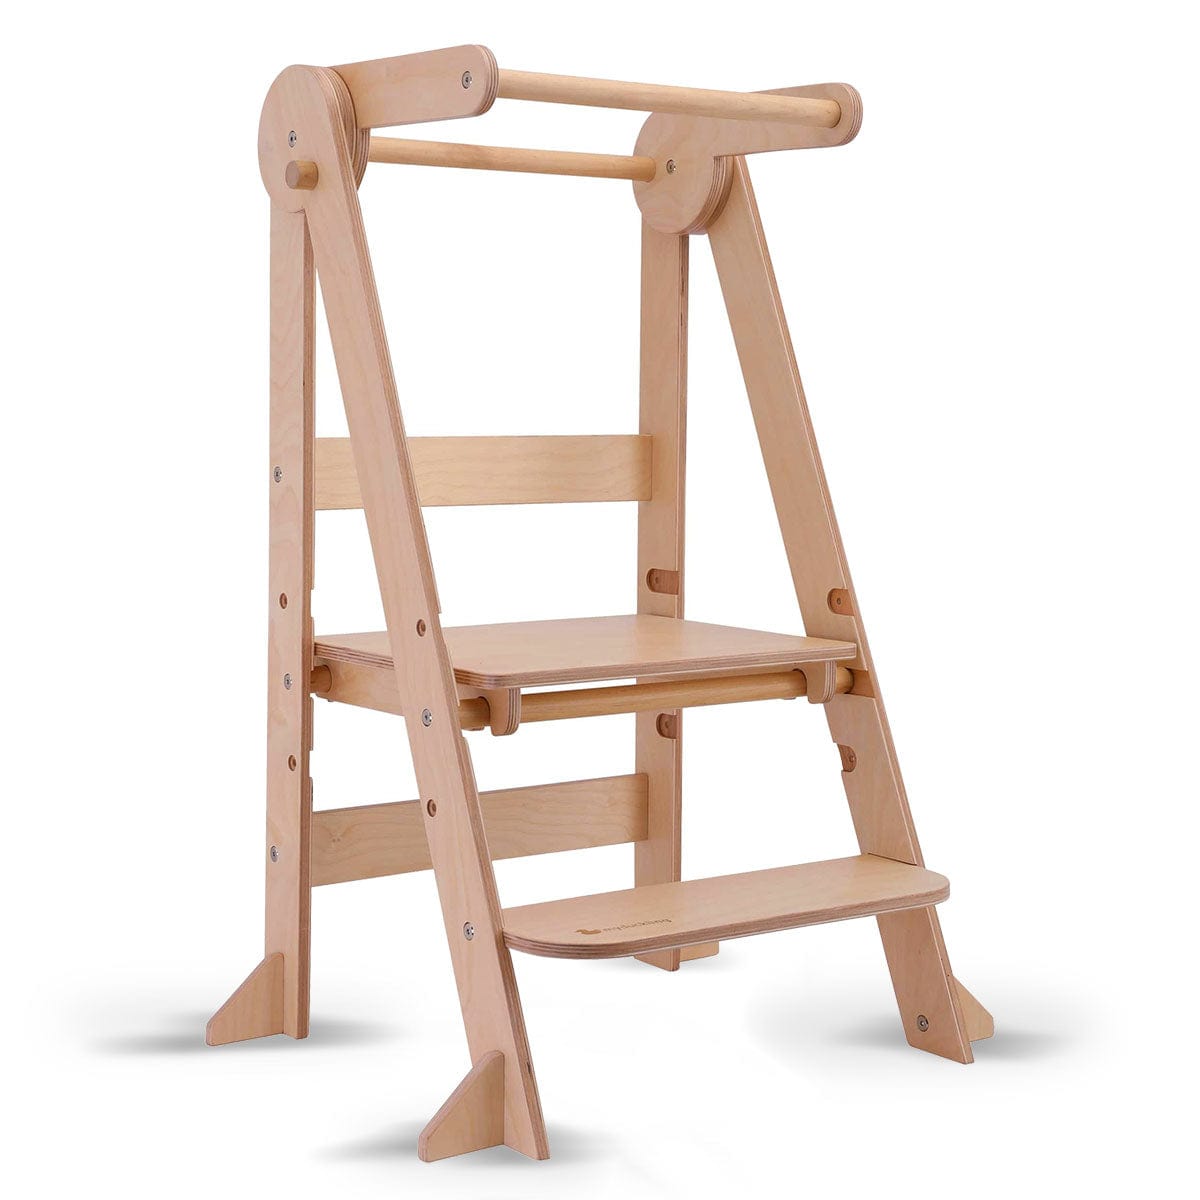 My Duckling MILA Deluxe Folding Adjustable Learning Tower- Late October Pre-Order